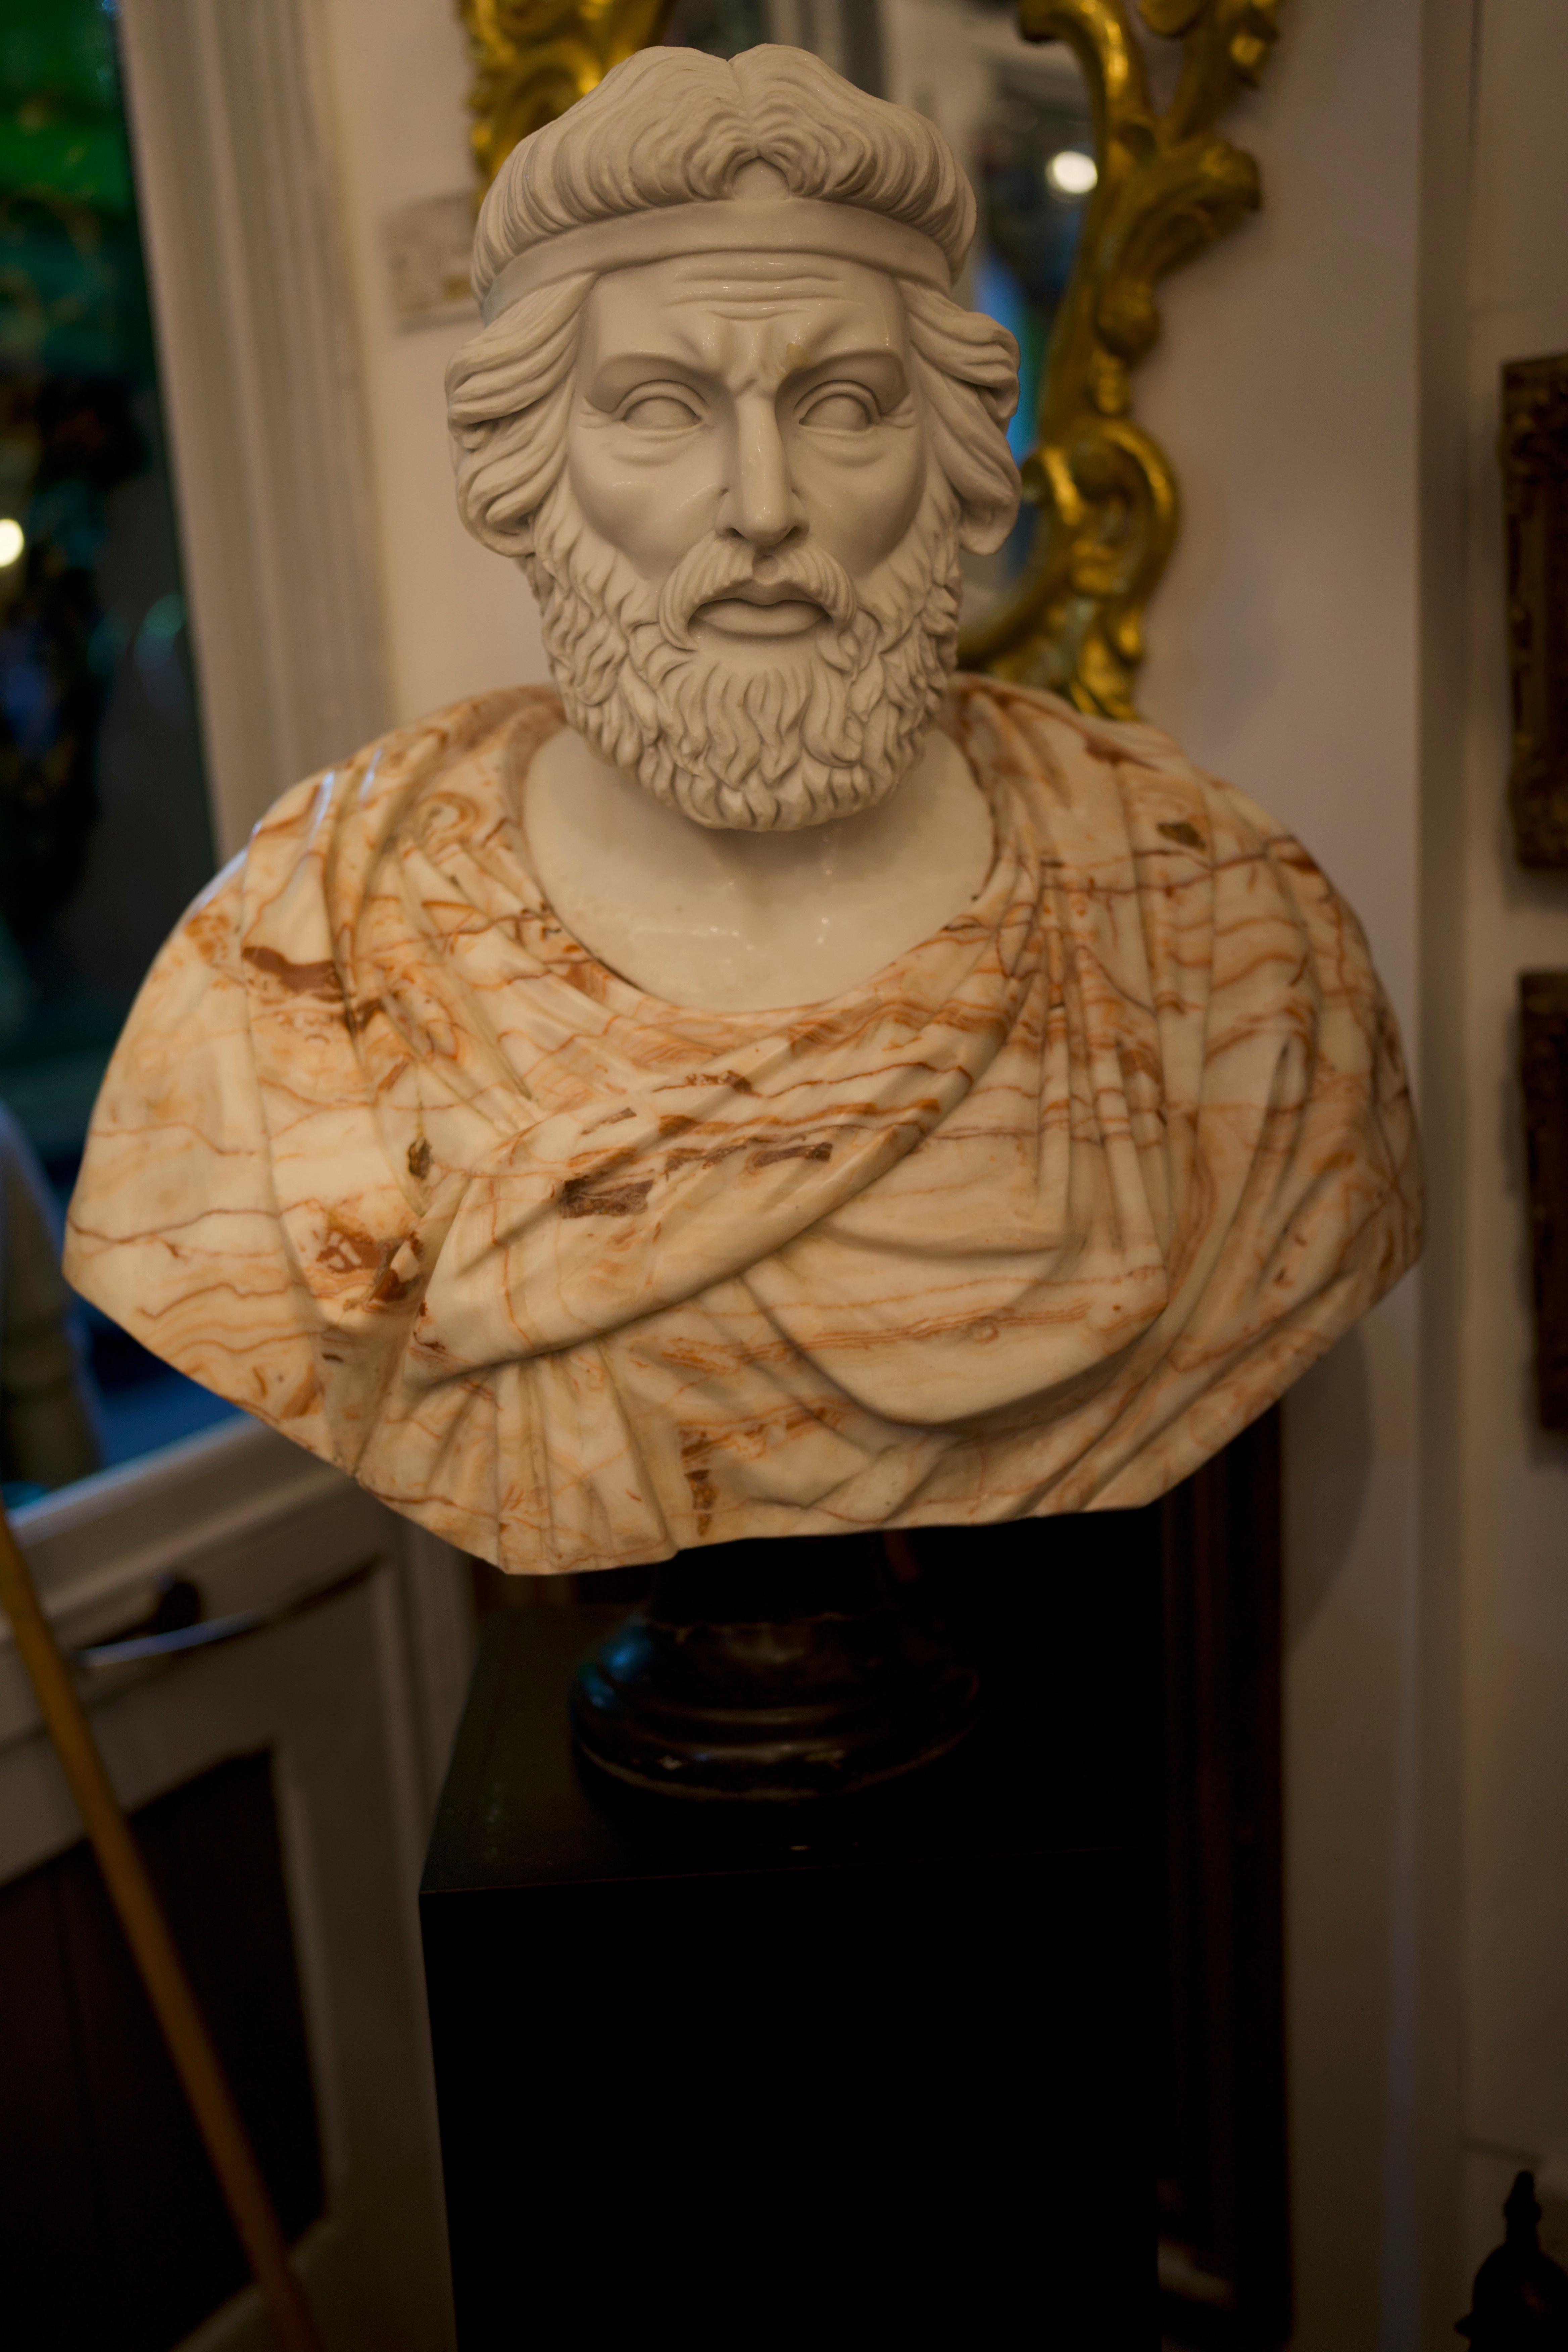 A large 20th Century Bust of Roman Hand Carved in Carrara White and Alicante red marble. Hand carved by craftsmen using Carrara white marble for the head and Alicante red for the toga, where the white veins give movement and realism to the cloth.